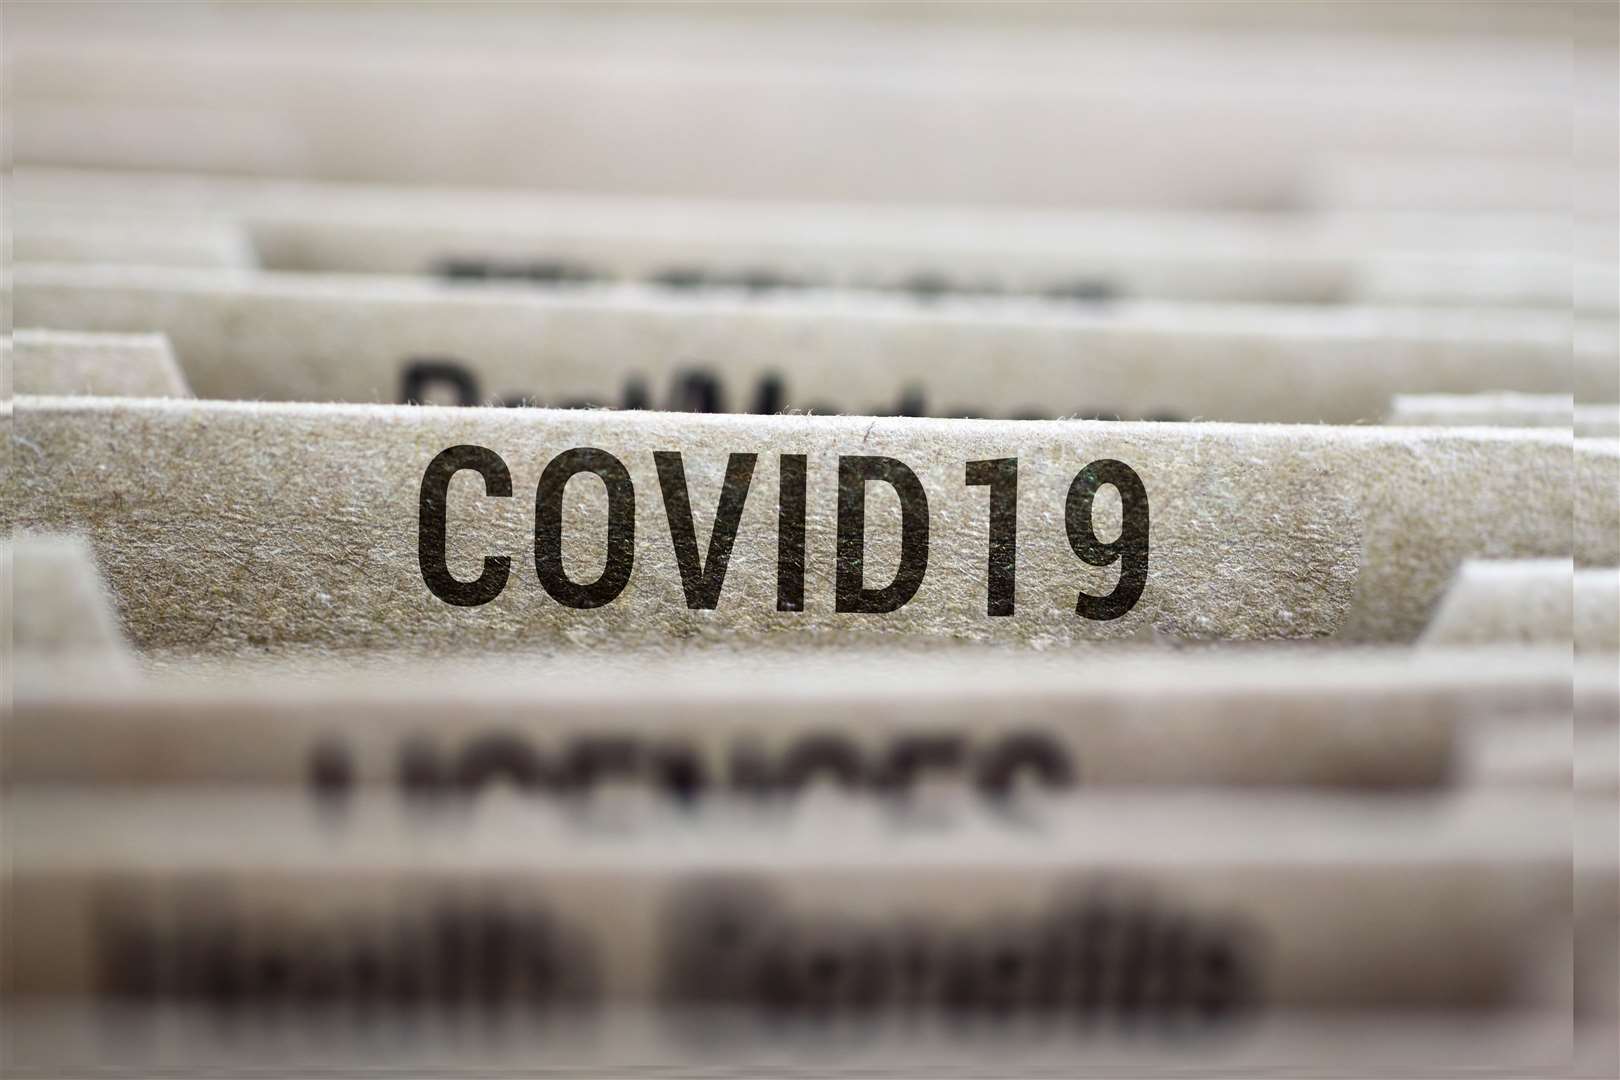 Cases of Covid-19 remain at 11 across Kent